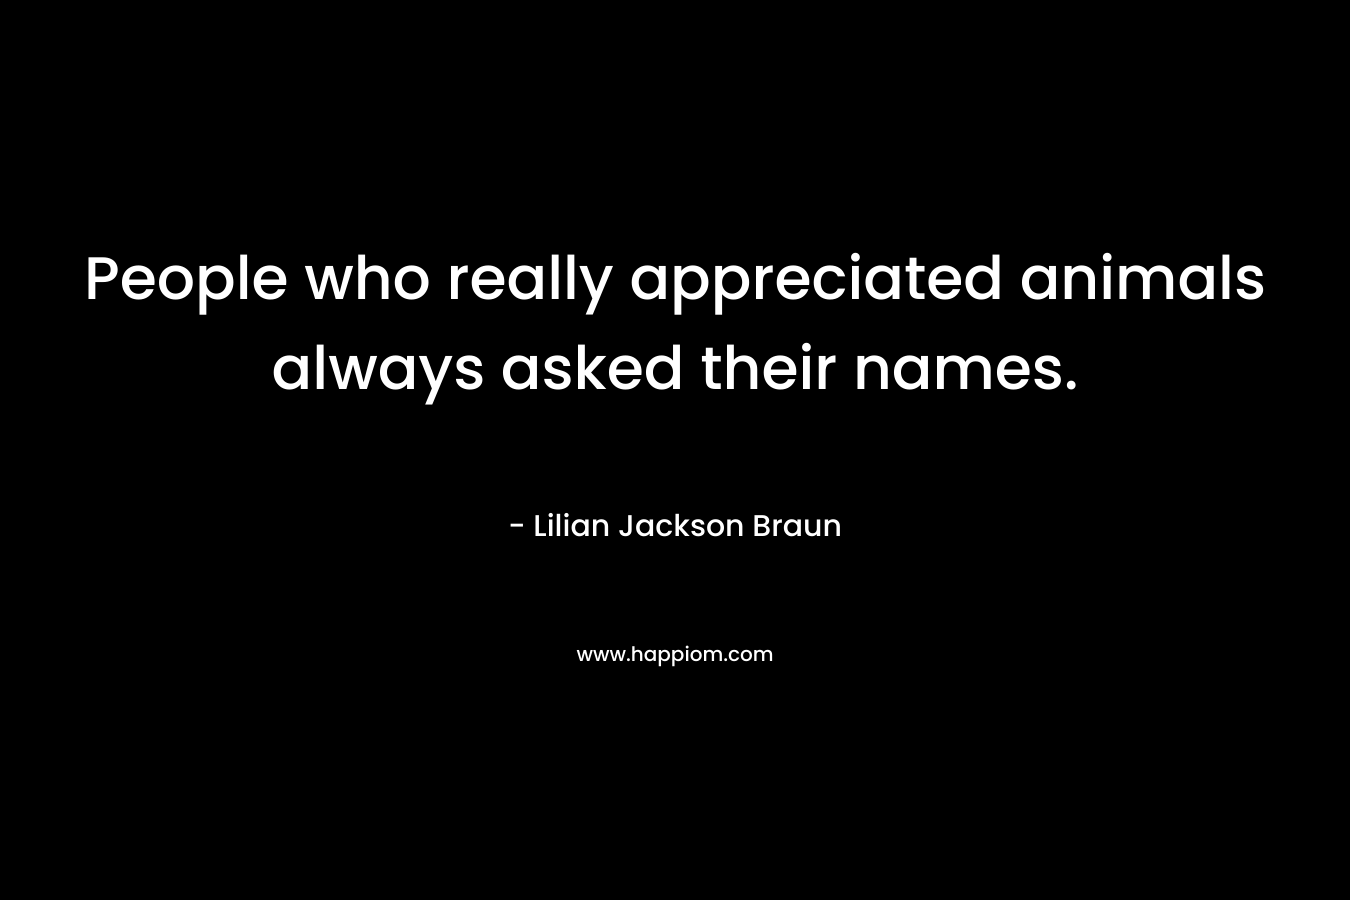 People who really appreciated animals always asked their names.